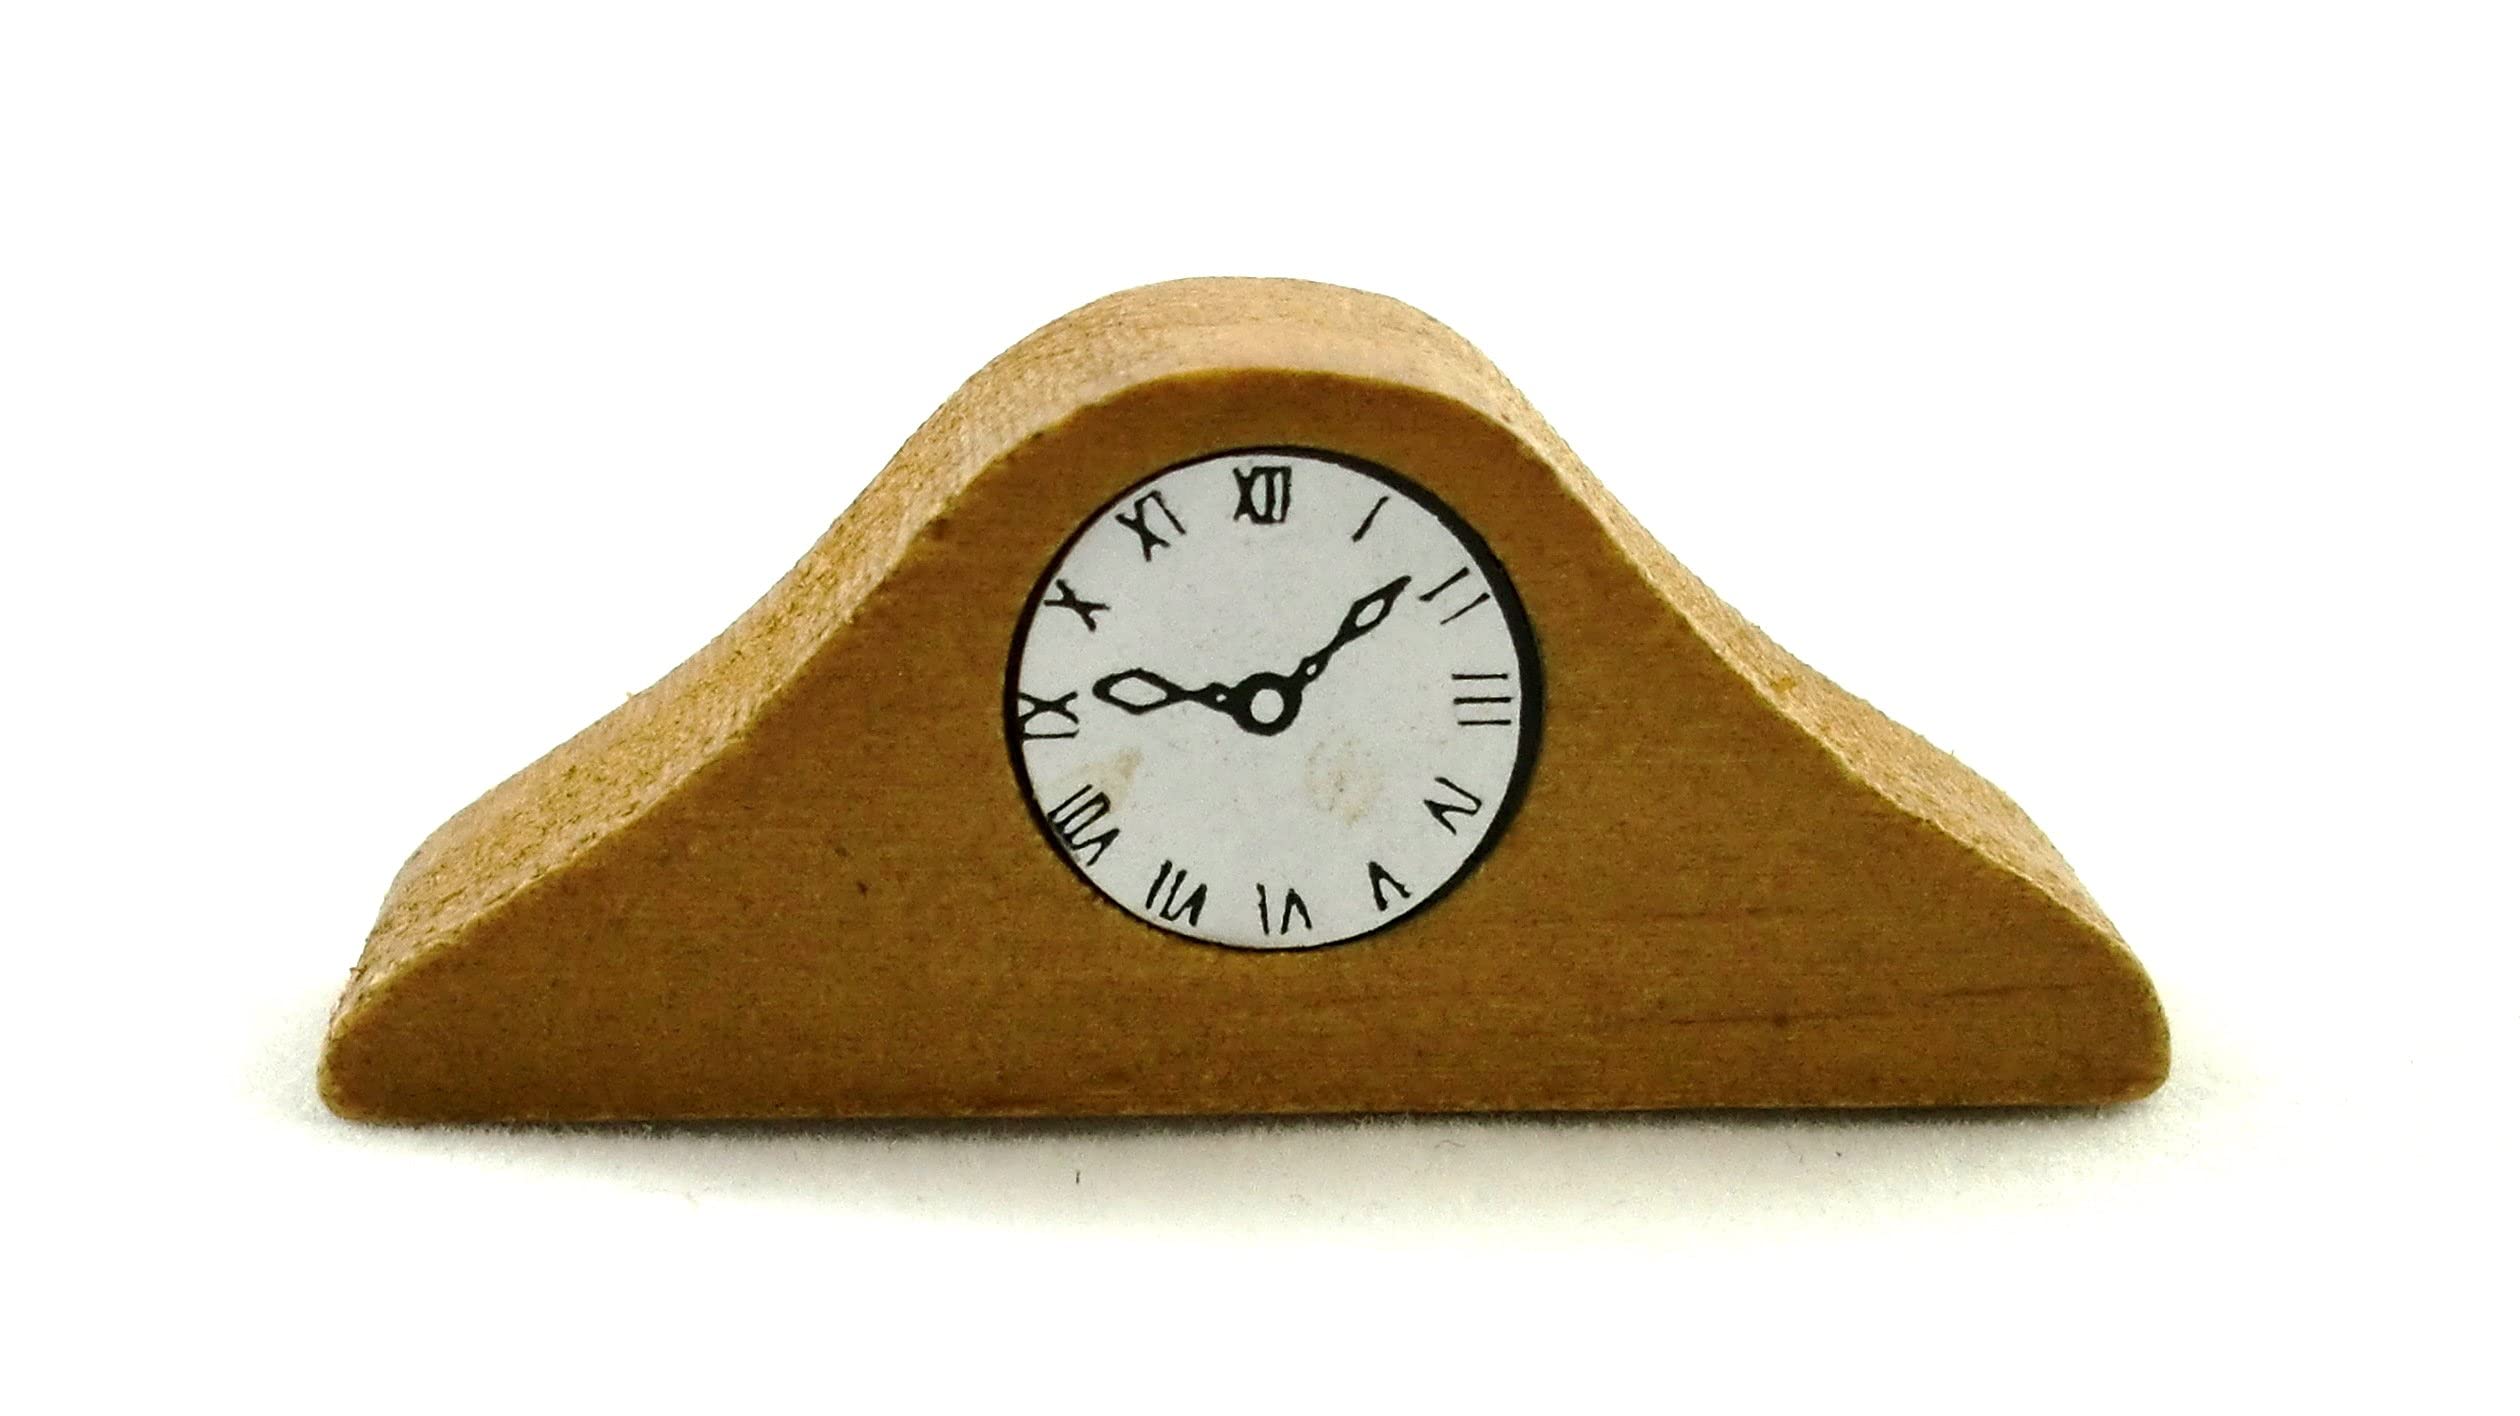 Dolls House Miniature 1:12 Scale Accessory Ornamental Wooden Mantle Clock